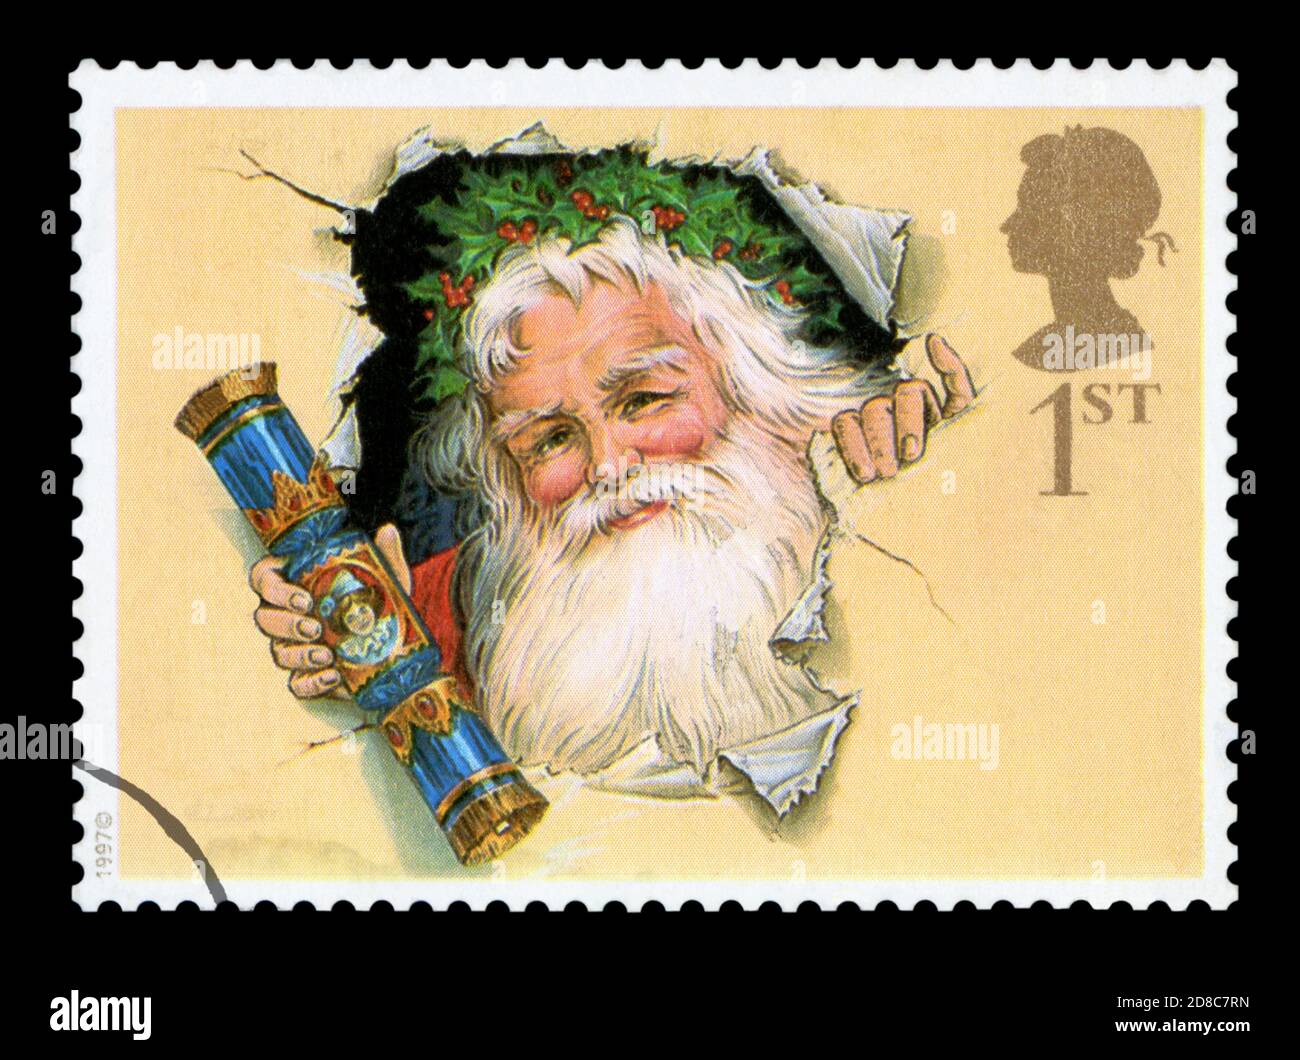 UNITED KINGDOM - CIRCA 1997: A stamp printed in England, shows Santa bursting through wrapping paper with cracker, circa 1997 Stock Photo